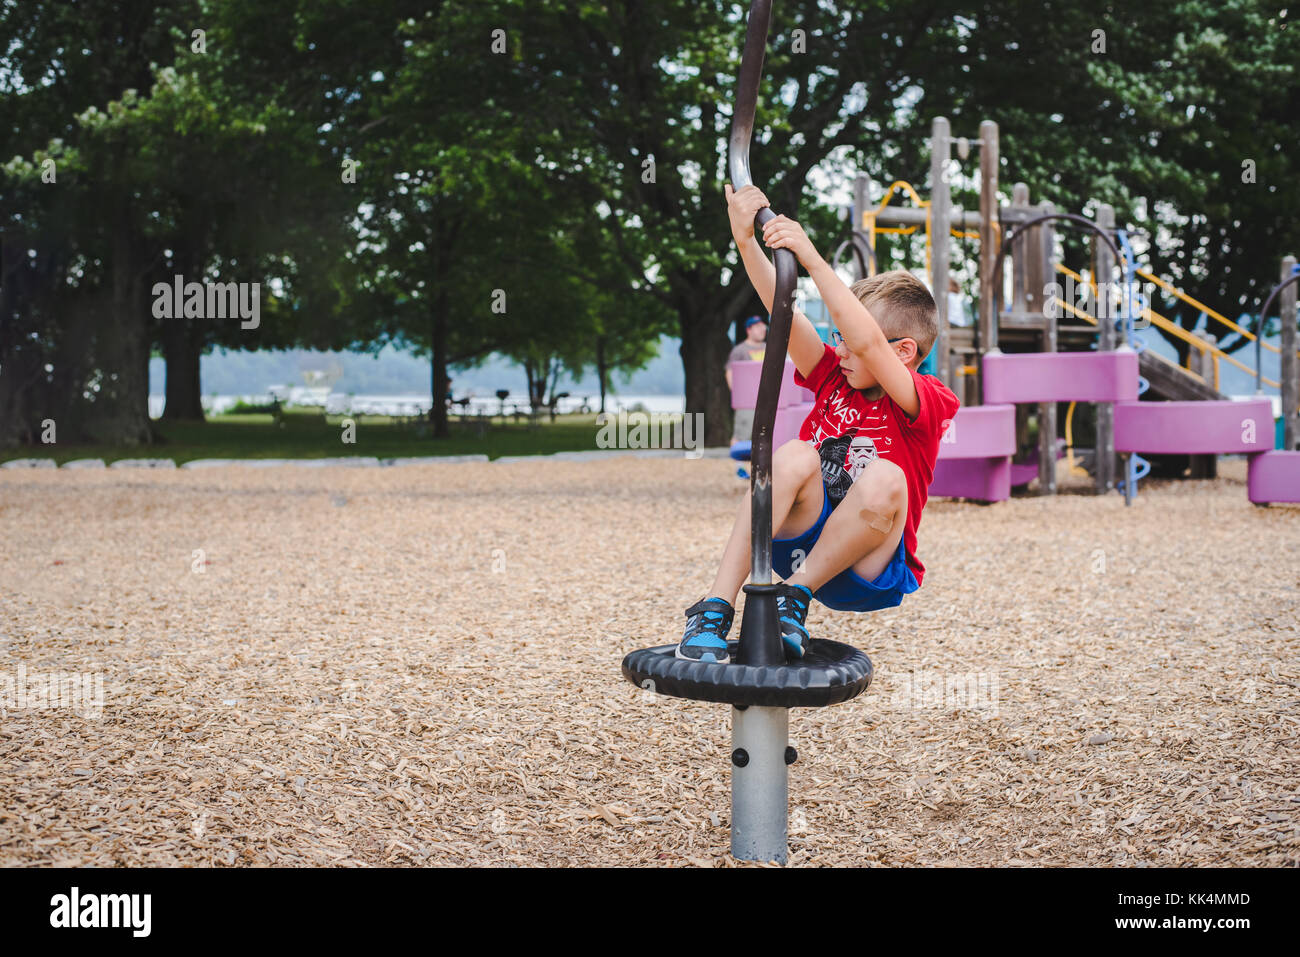 A boy child plays on playground equipment on a summer day Stock Photo